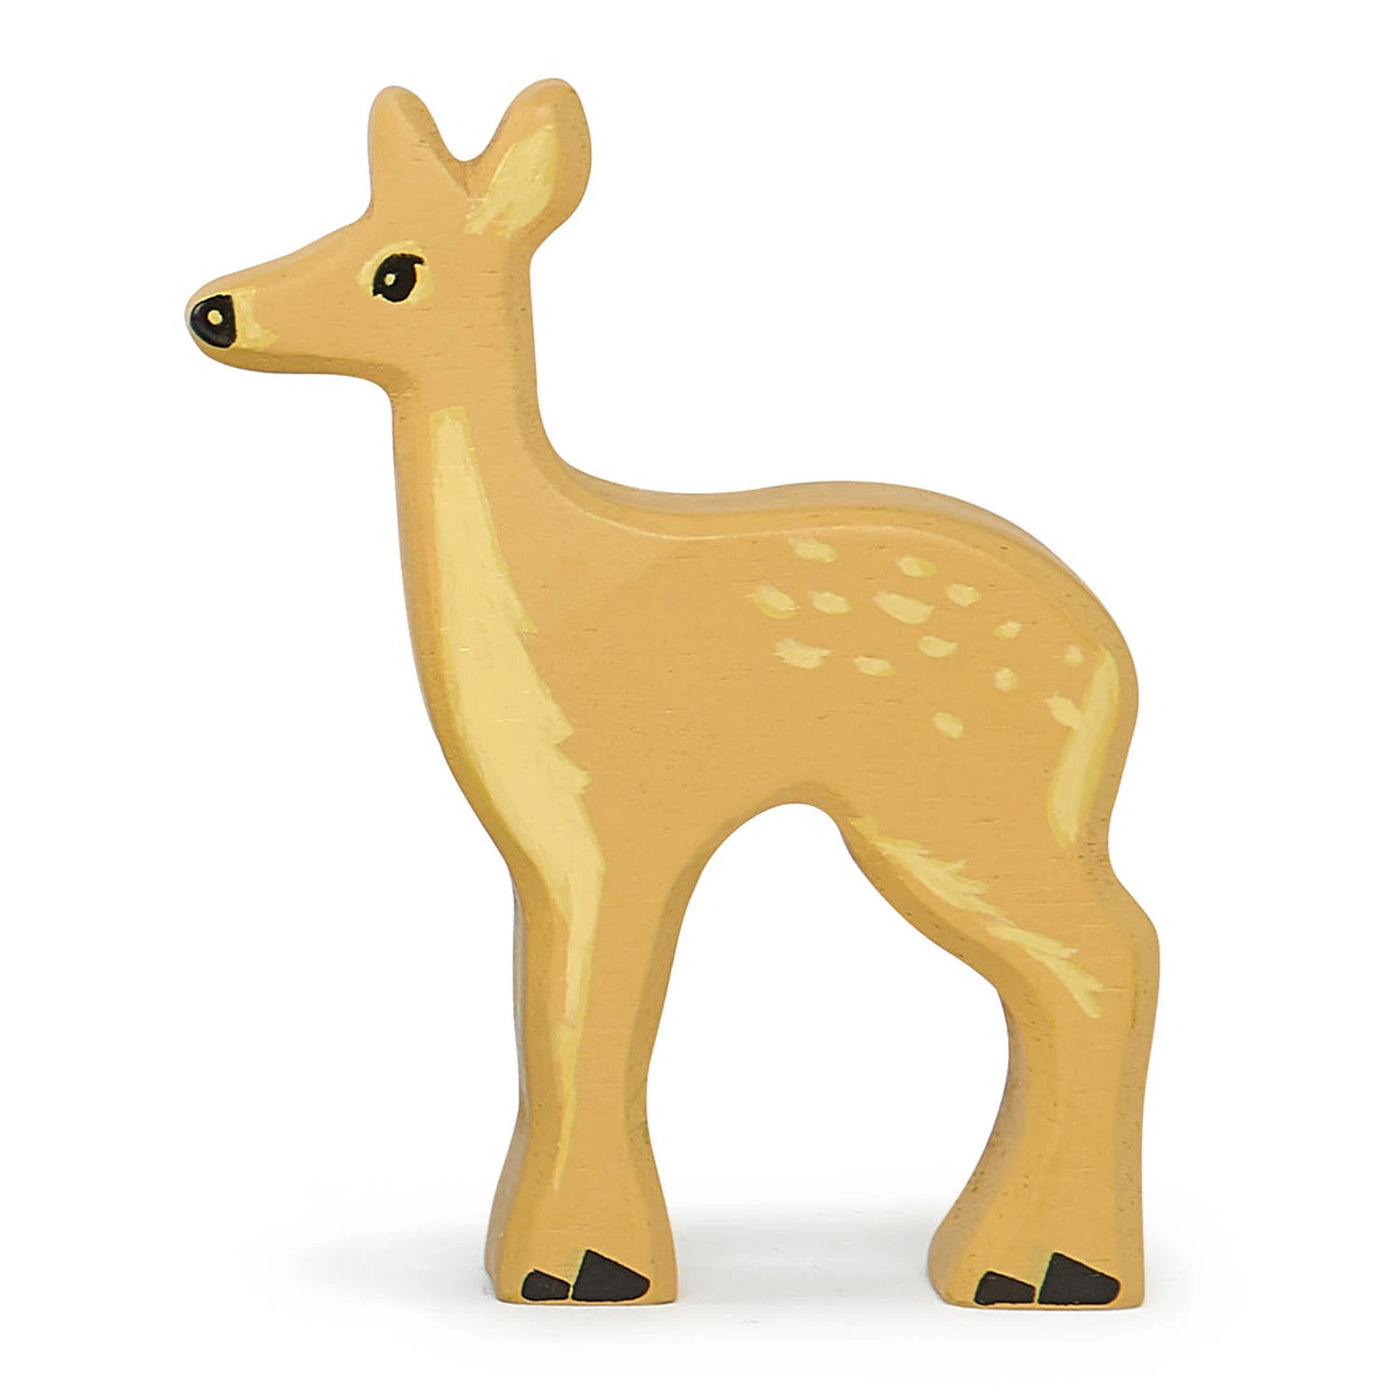 Wooden Woodland Fallow Deer Animal toy for kids made of eco-friendly wood